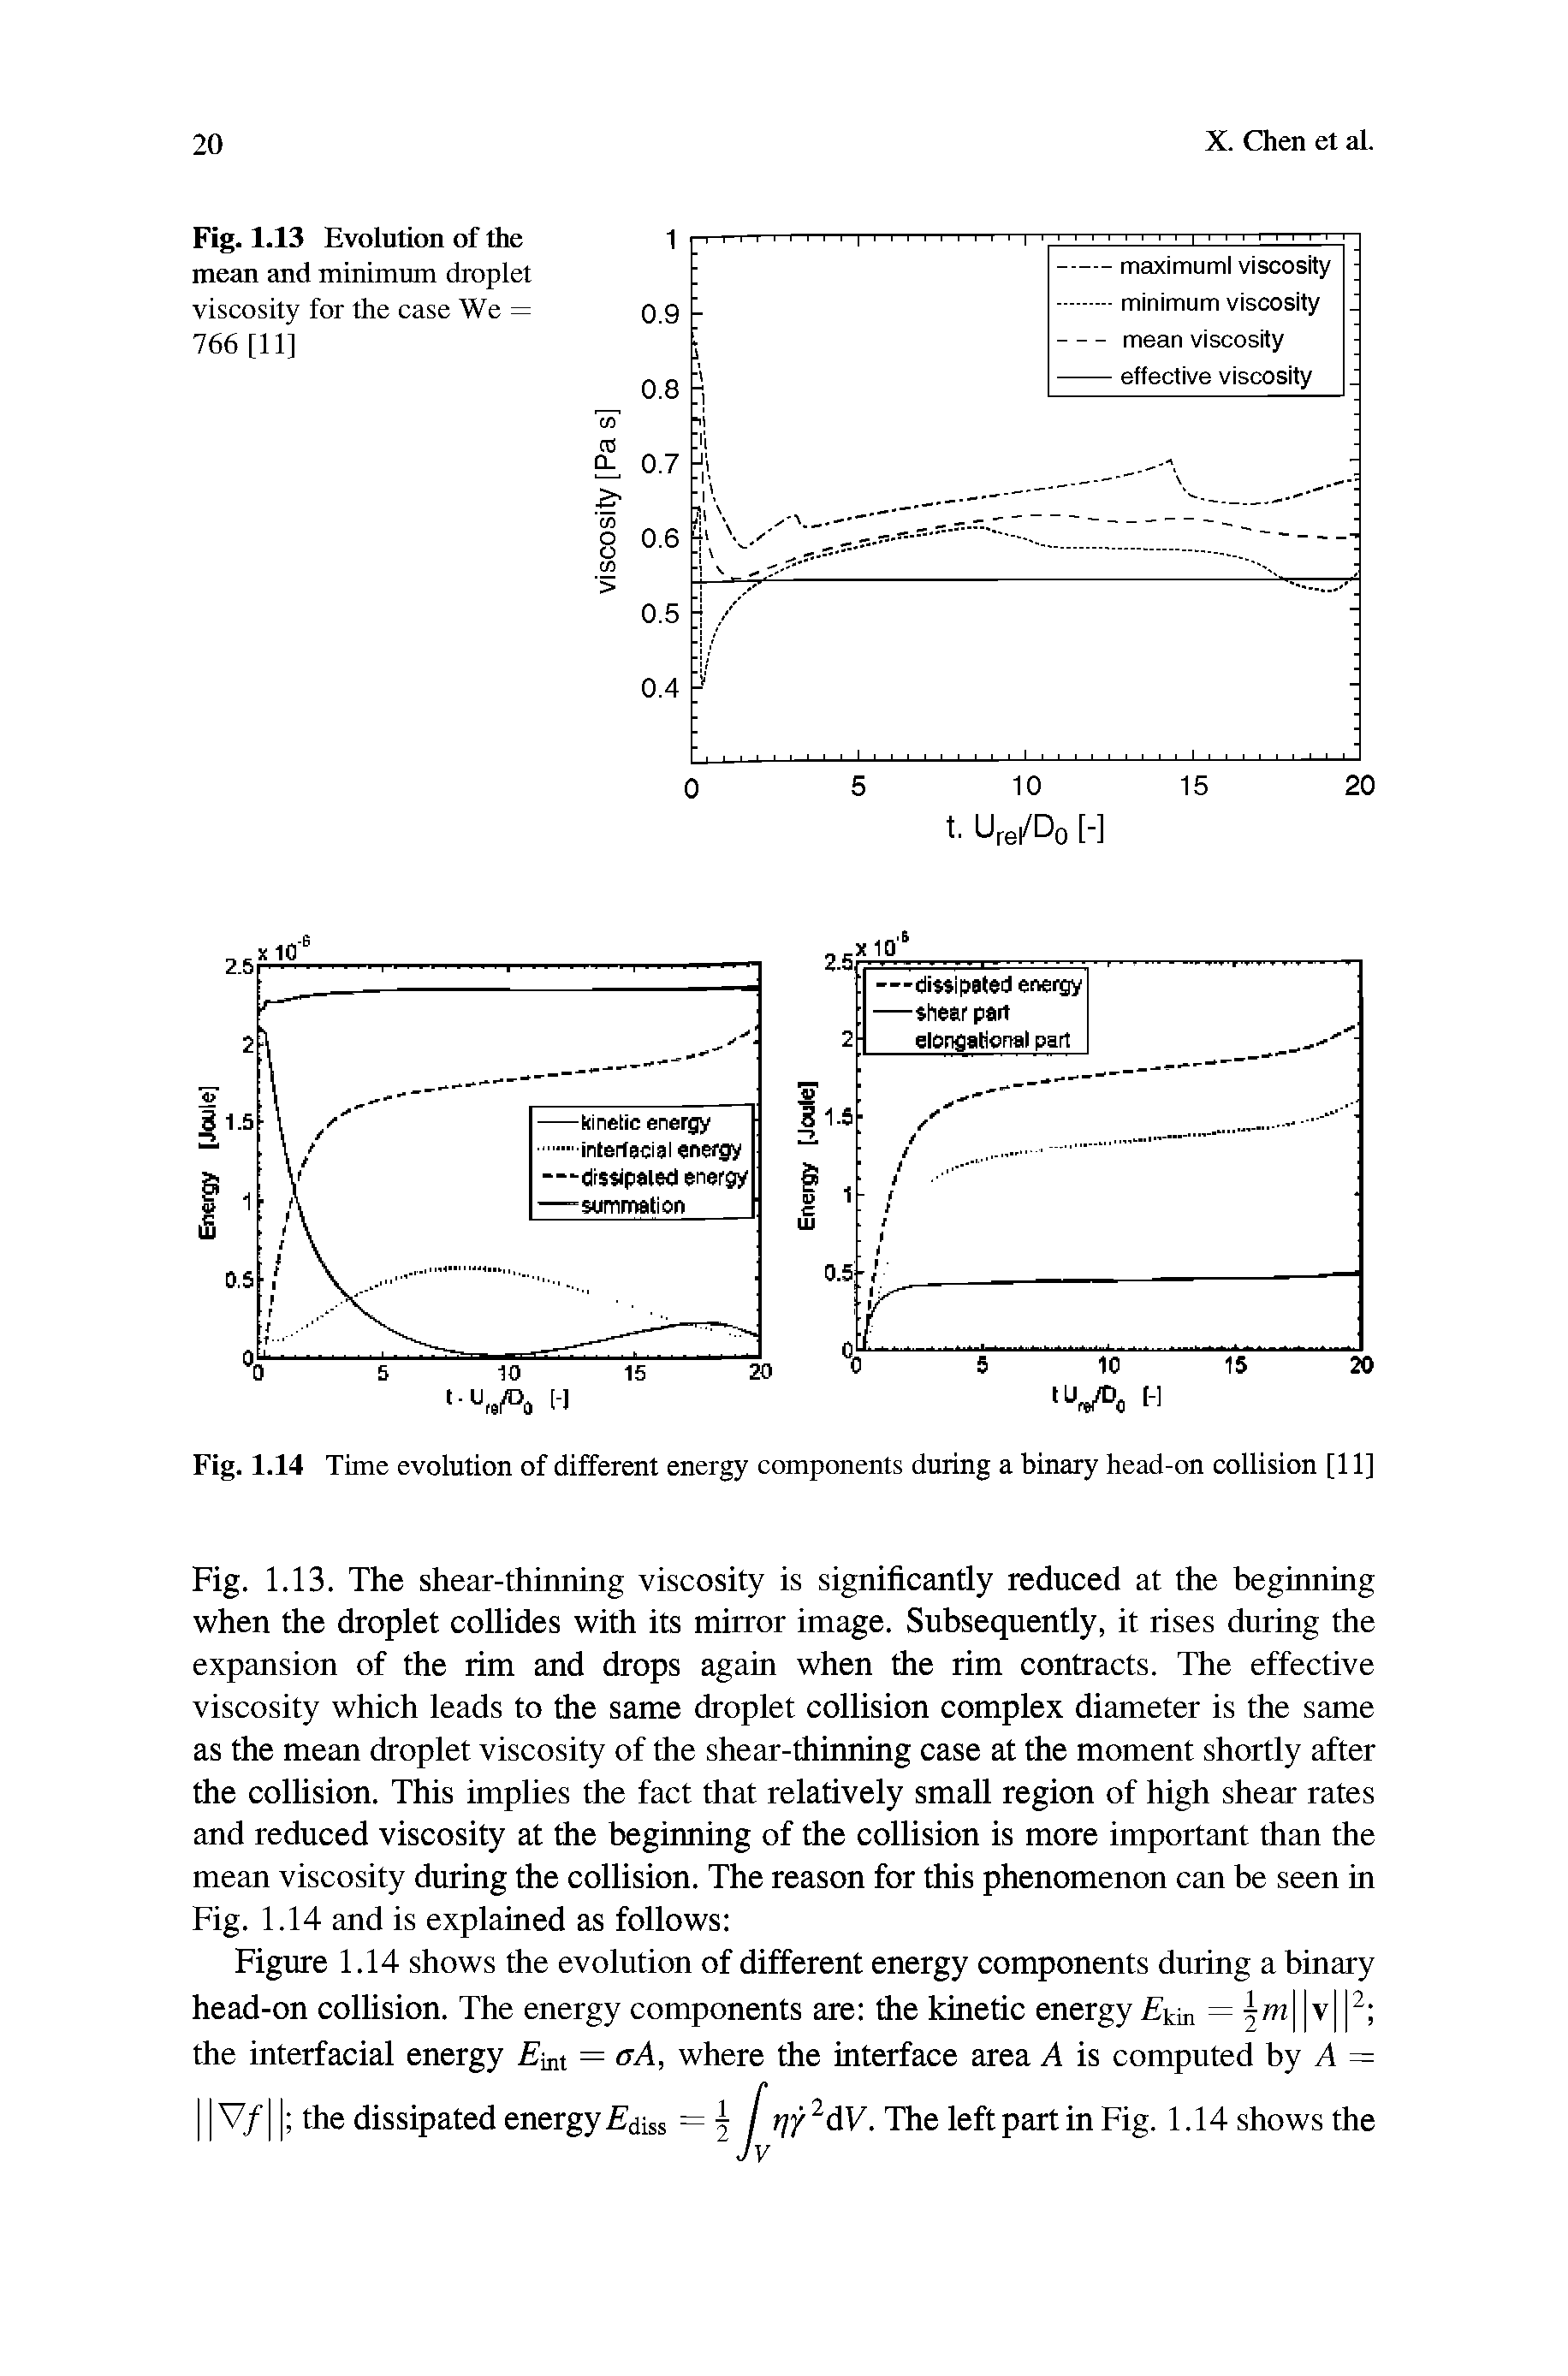 Fig. 1.13. The shear-thinning viscosity is significantly reduced at the beginning when the droplet collides with its mirror image. Subsequently, it rises during the expansion of the rim and drops again when the rim contracts. The effective viscosity which leads to the same droplet collision complex diameter is the same as the mean droplet viscosity of the shear-thinning case at the moment shortly after the collision. This implies the fact that relatively small region of high shear rates and reduced viscosity at the beginning of the collision is more important than the mean viscosity during the collision. The reason for this phenomenon can be seen in Fig. 1.14 and is explained as follows ...